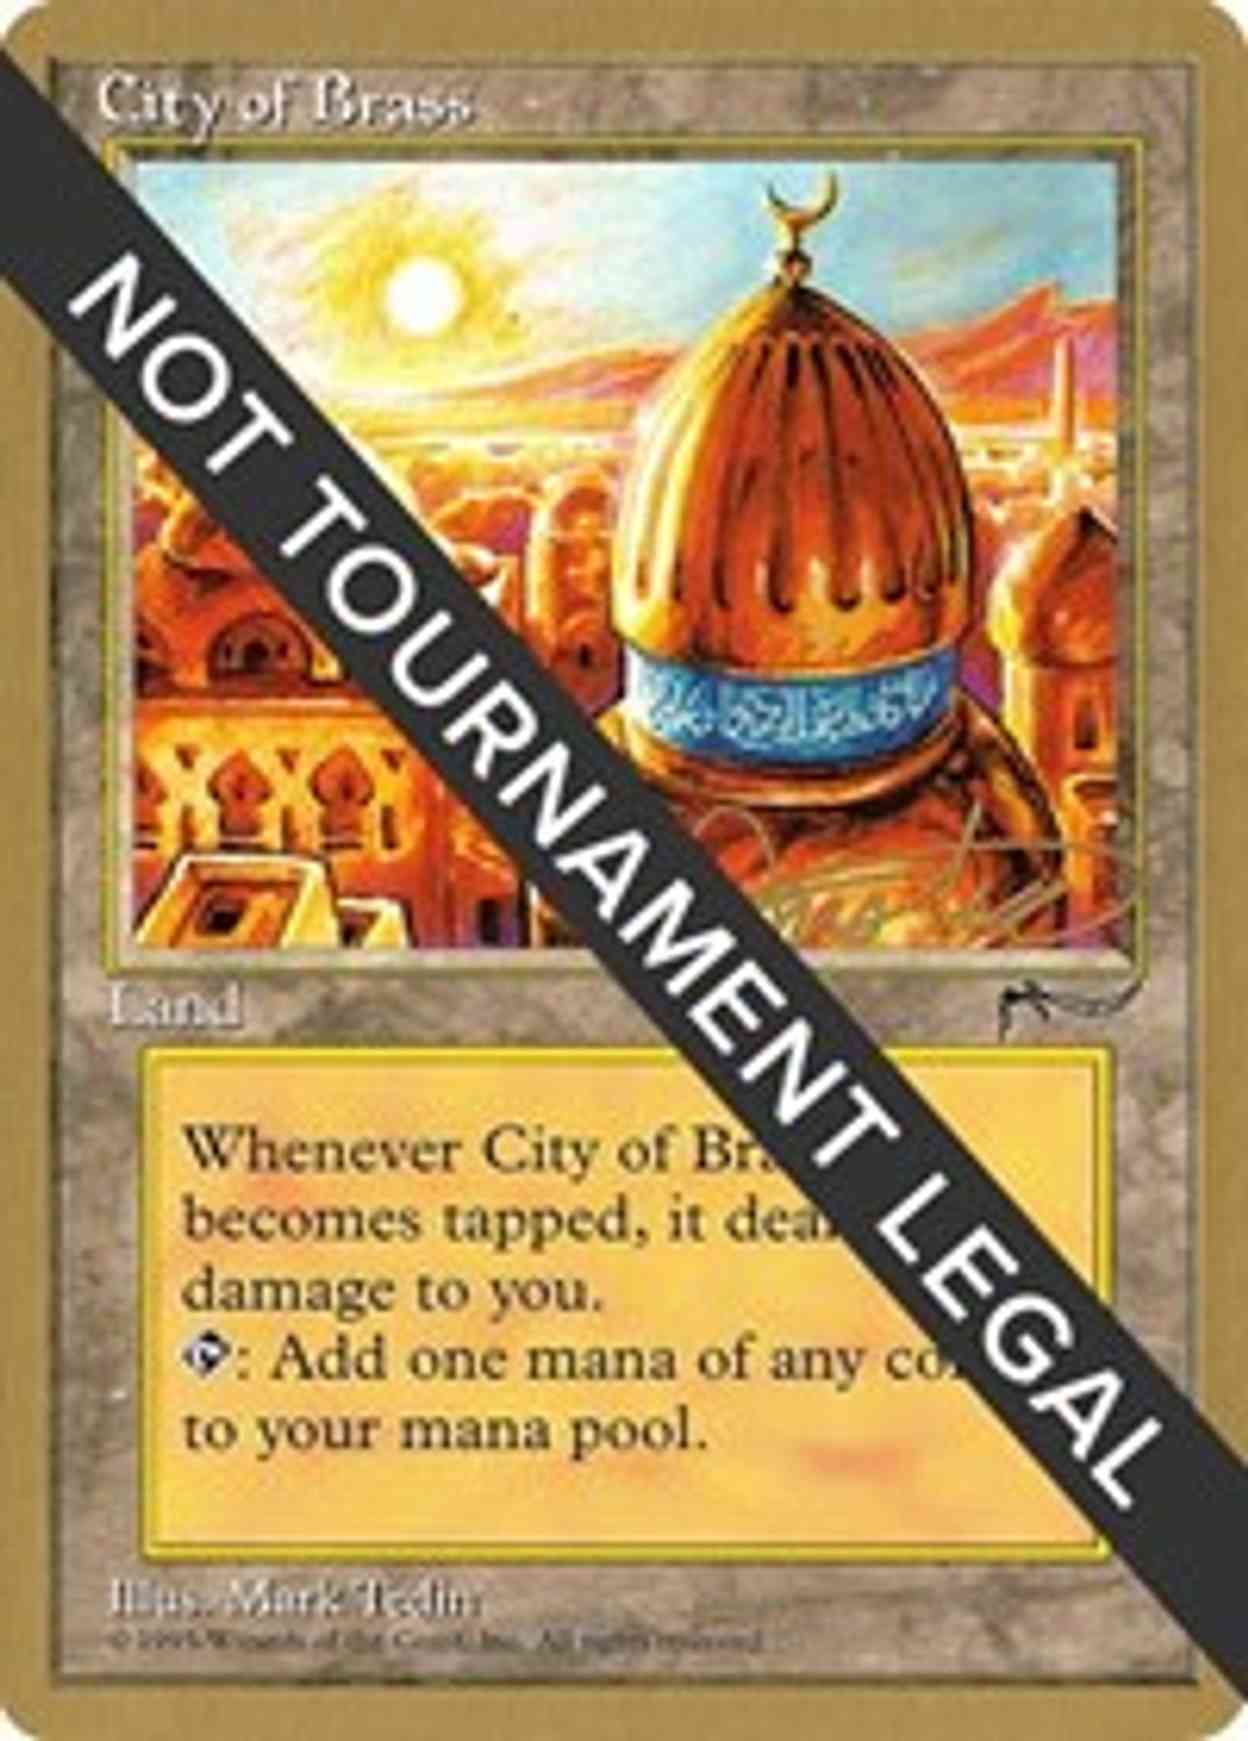 City of Brass - 1996 Mark Justice (ARN) magic card front